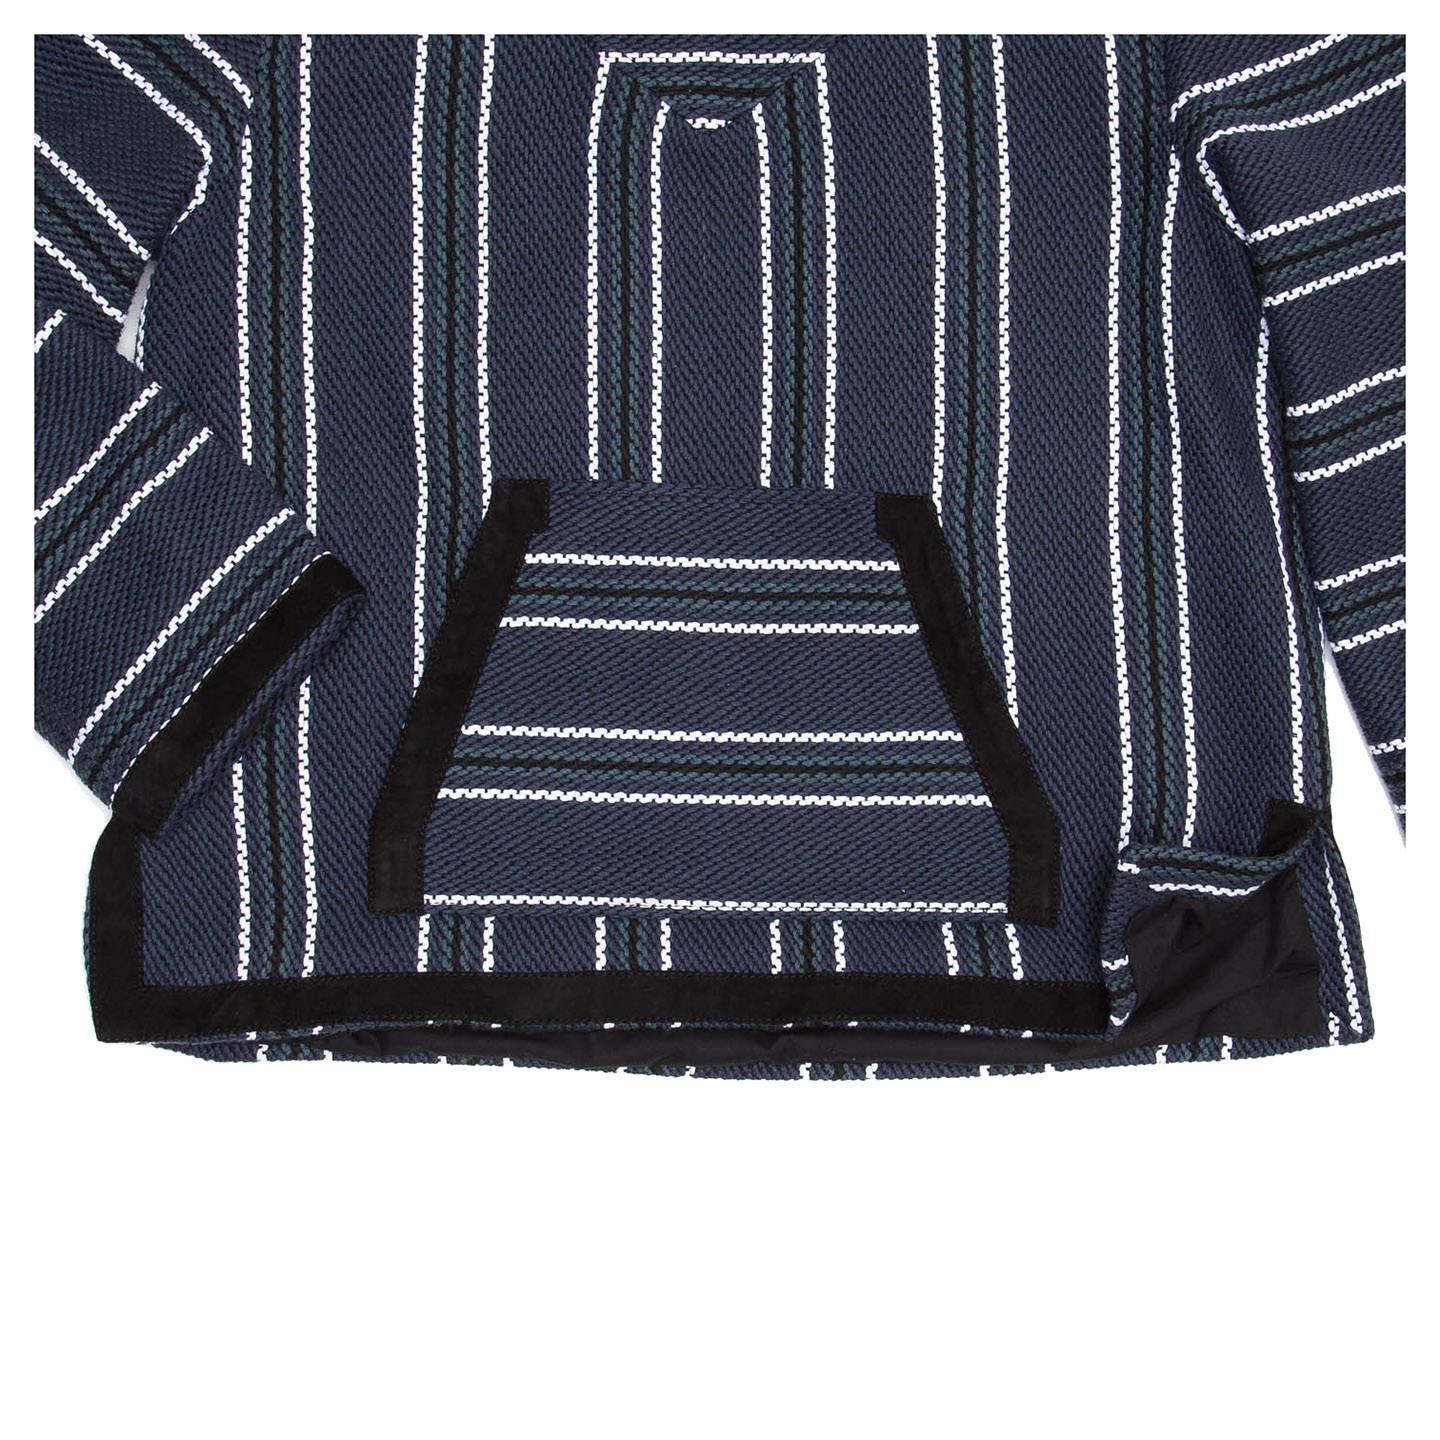 Proenza Schouler Blue Striped Hooded Sweater In New Condition For Sale In Brooklyn, NY